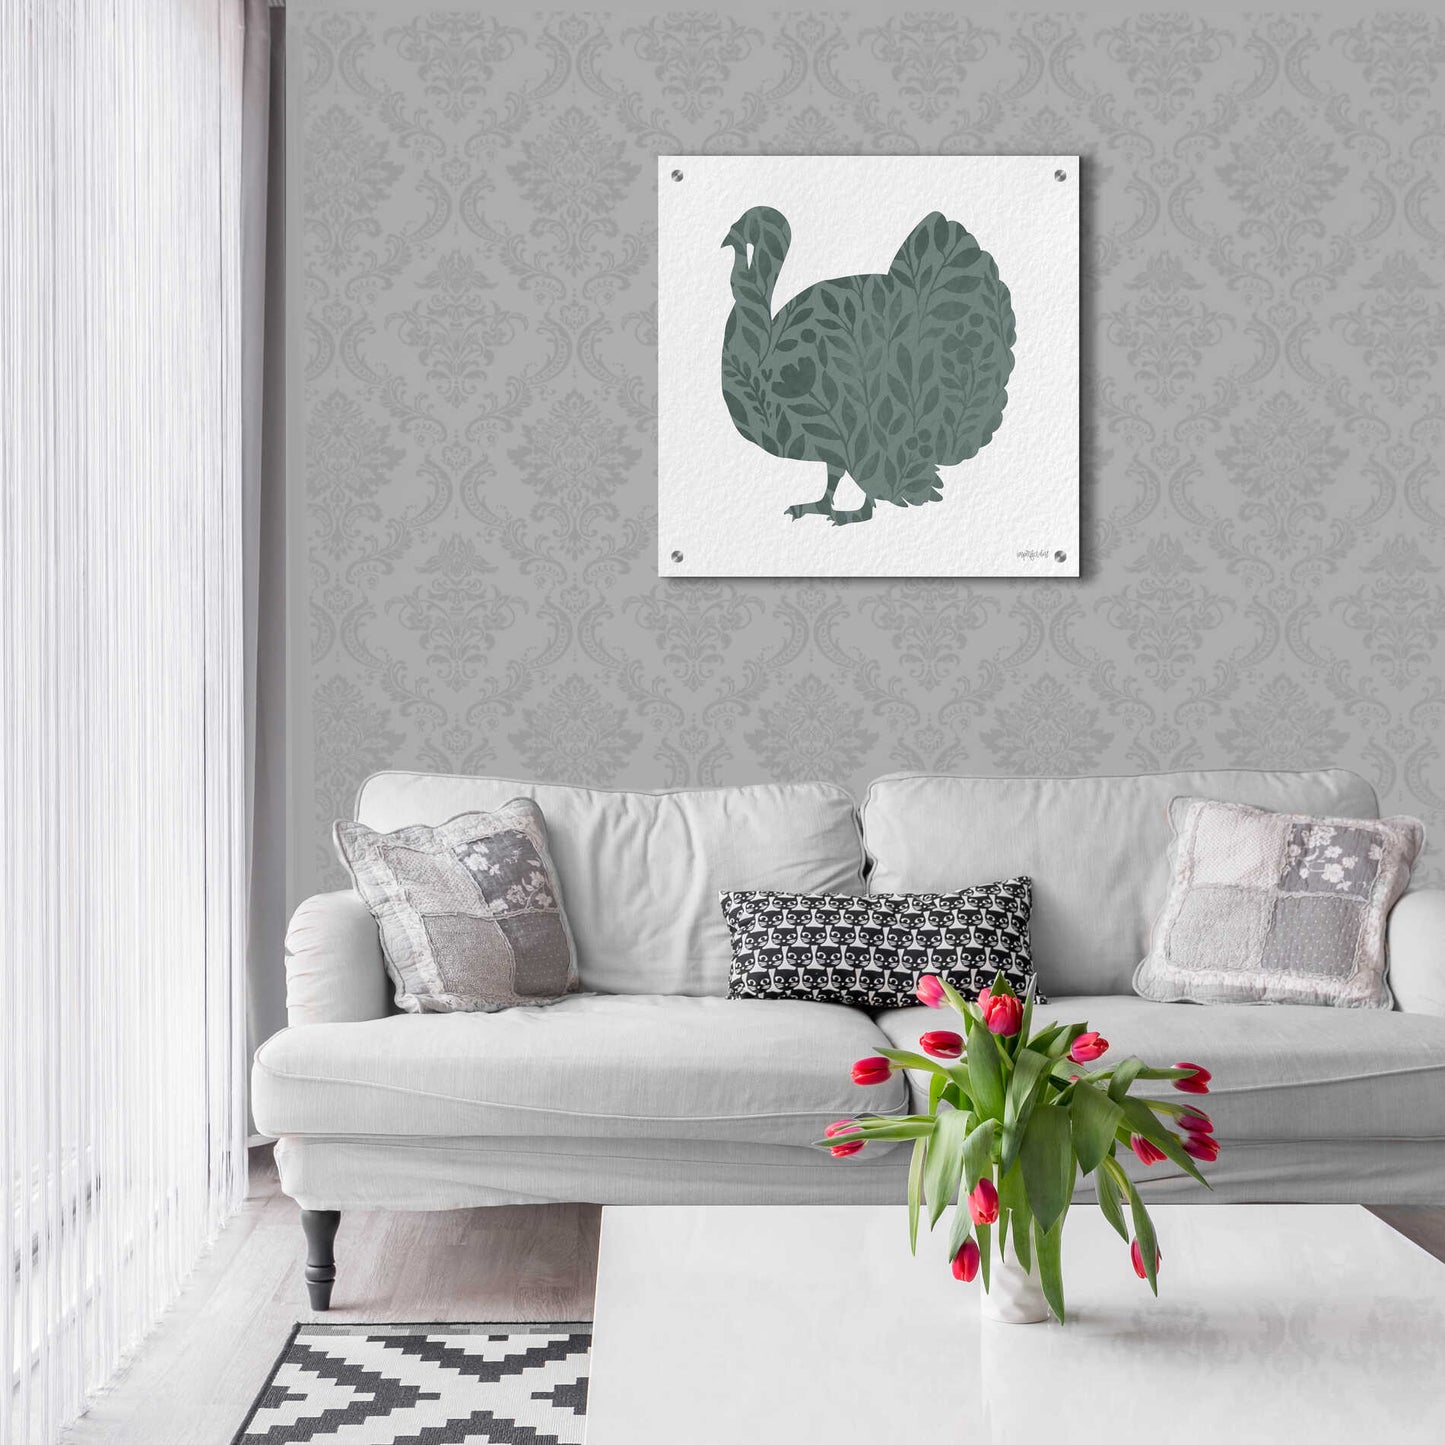 Epic Art 'Floral Turkey' by Imperfect Dust, Acrylic Glass Wall Art,24x24